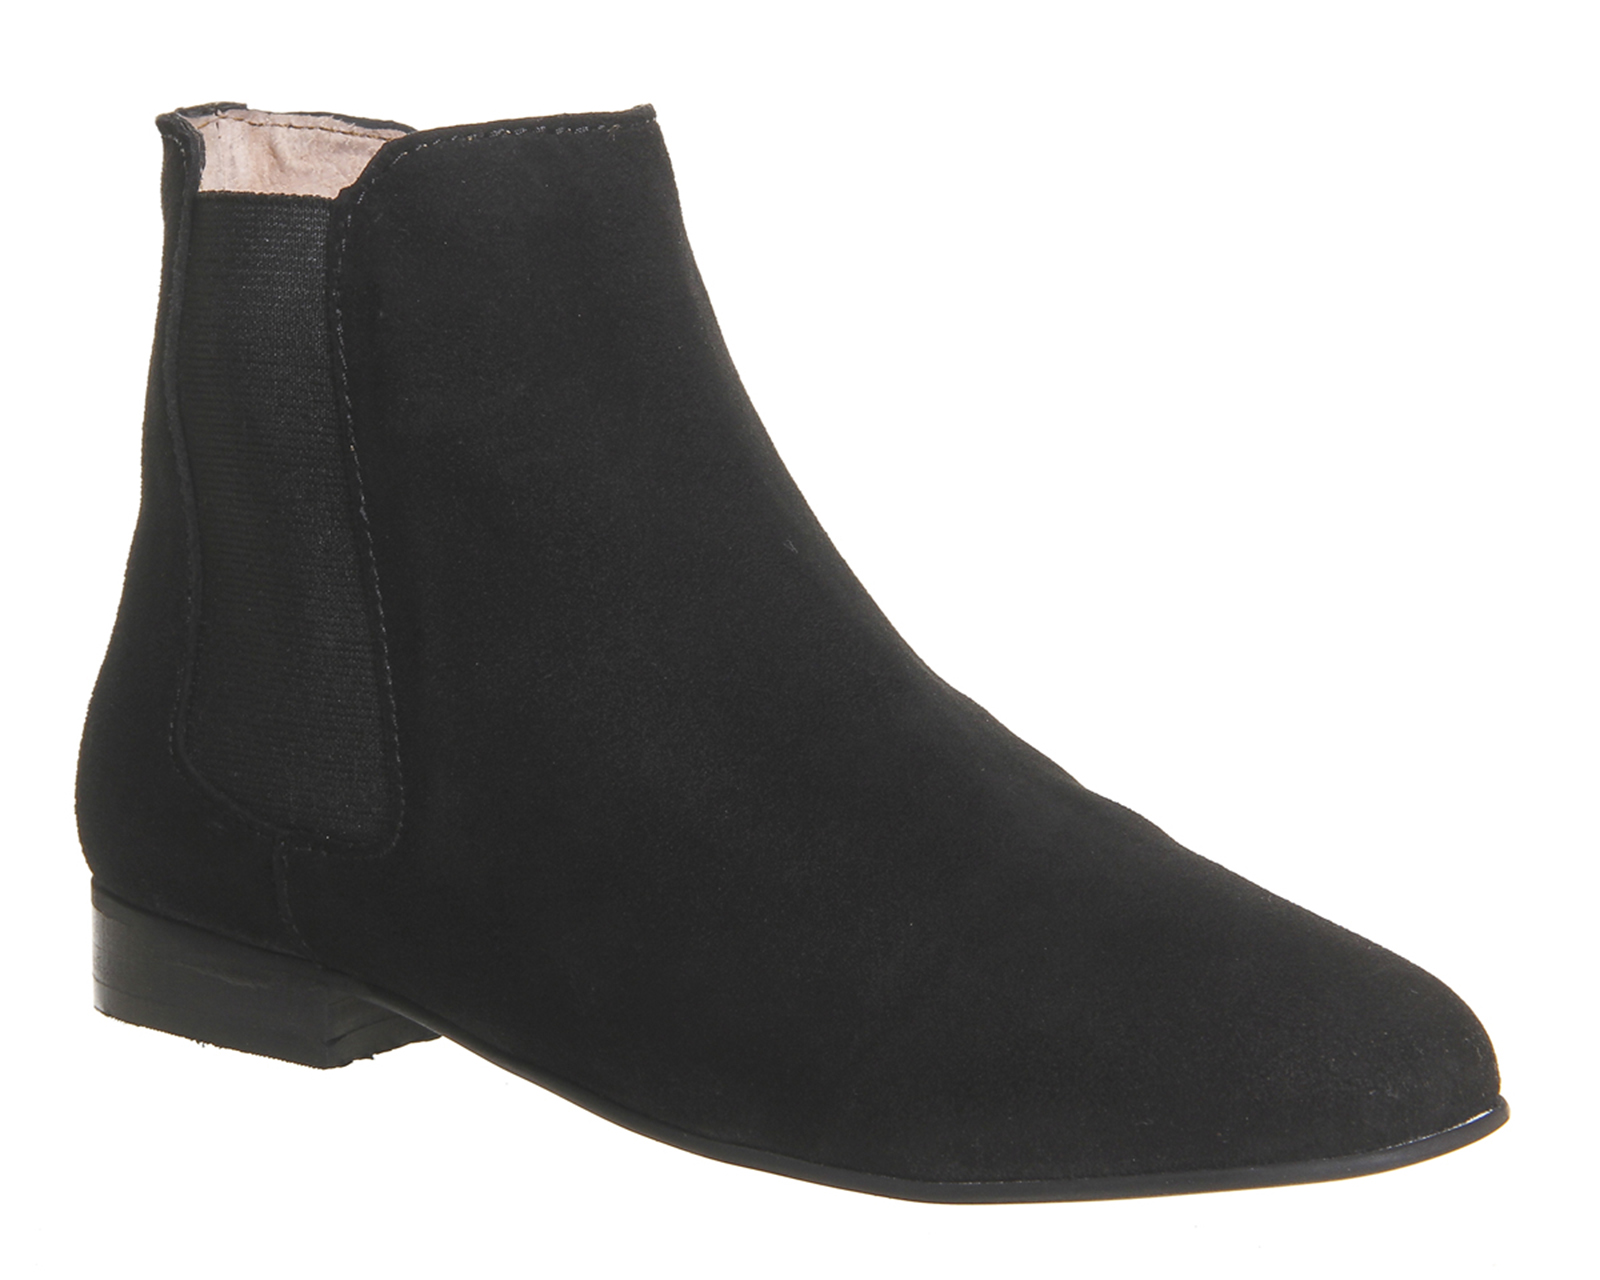 office chelsea boots